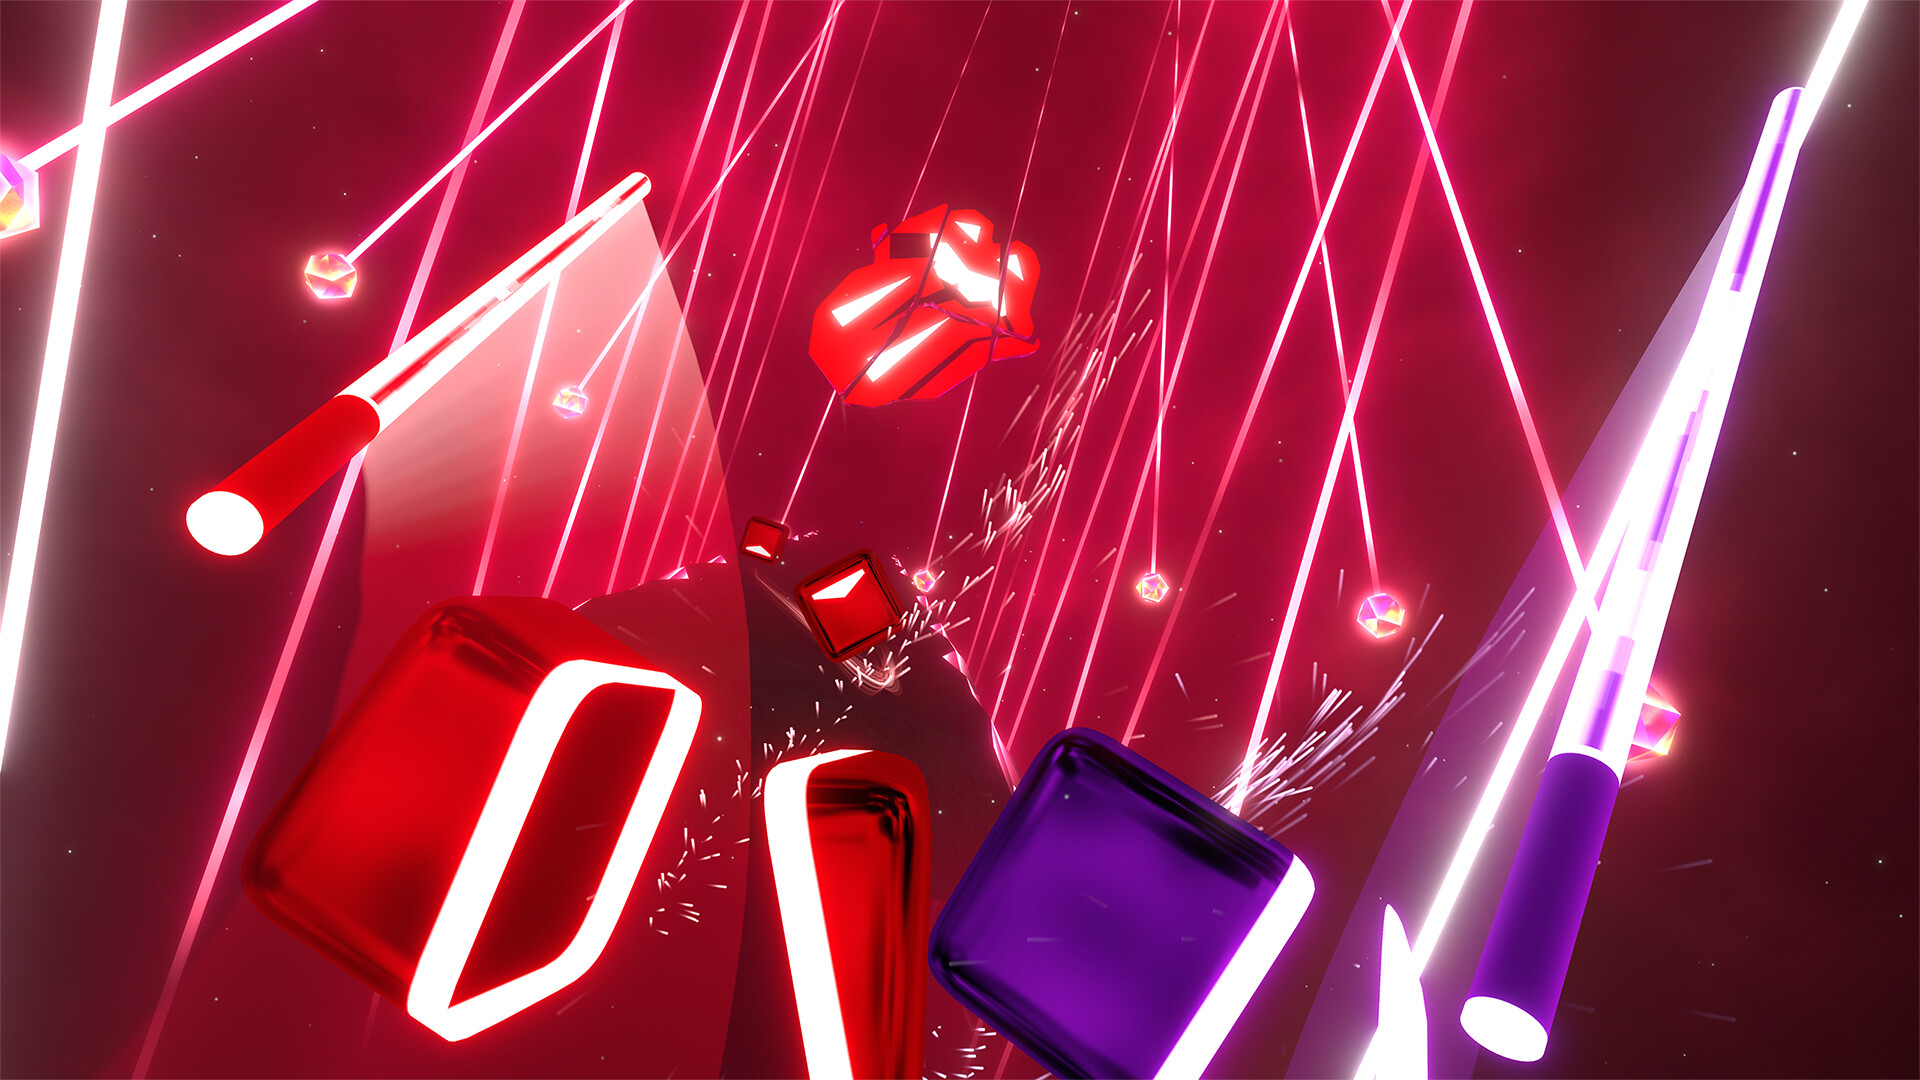 Beat Saber - The Rolling Stones - "Mess it Up" Featured Screenshot #1